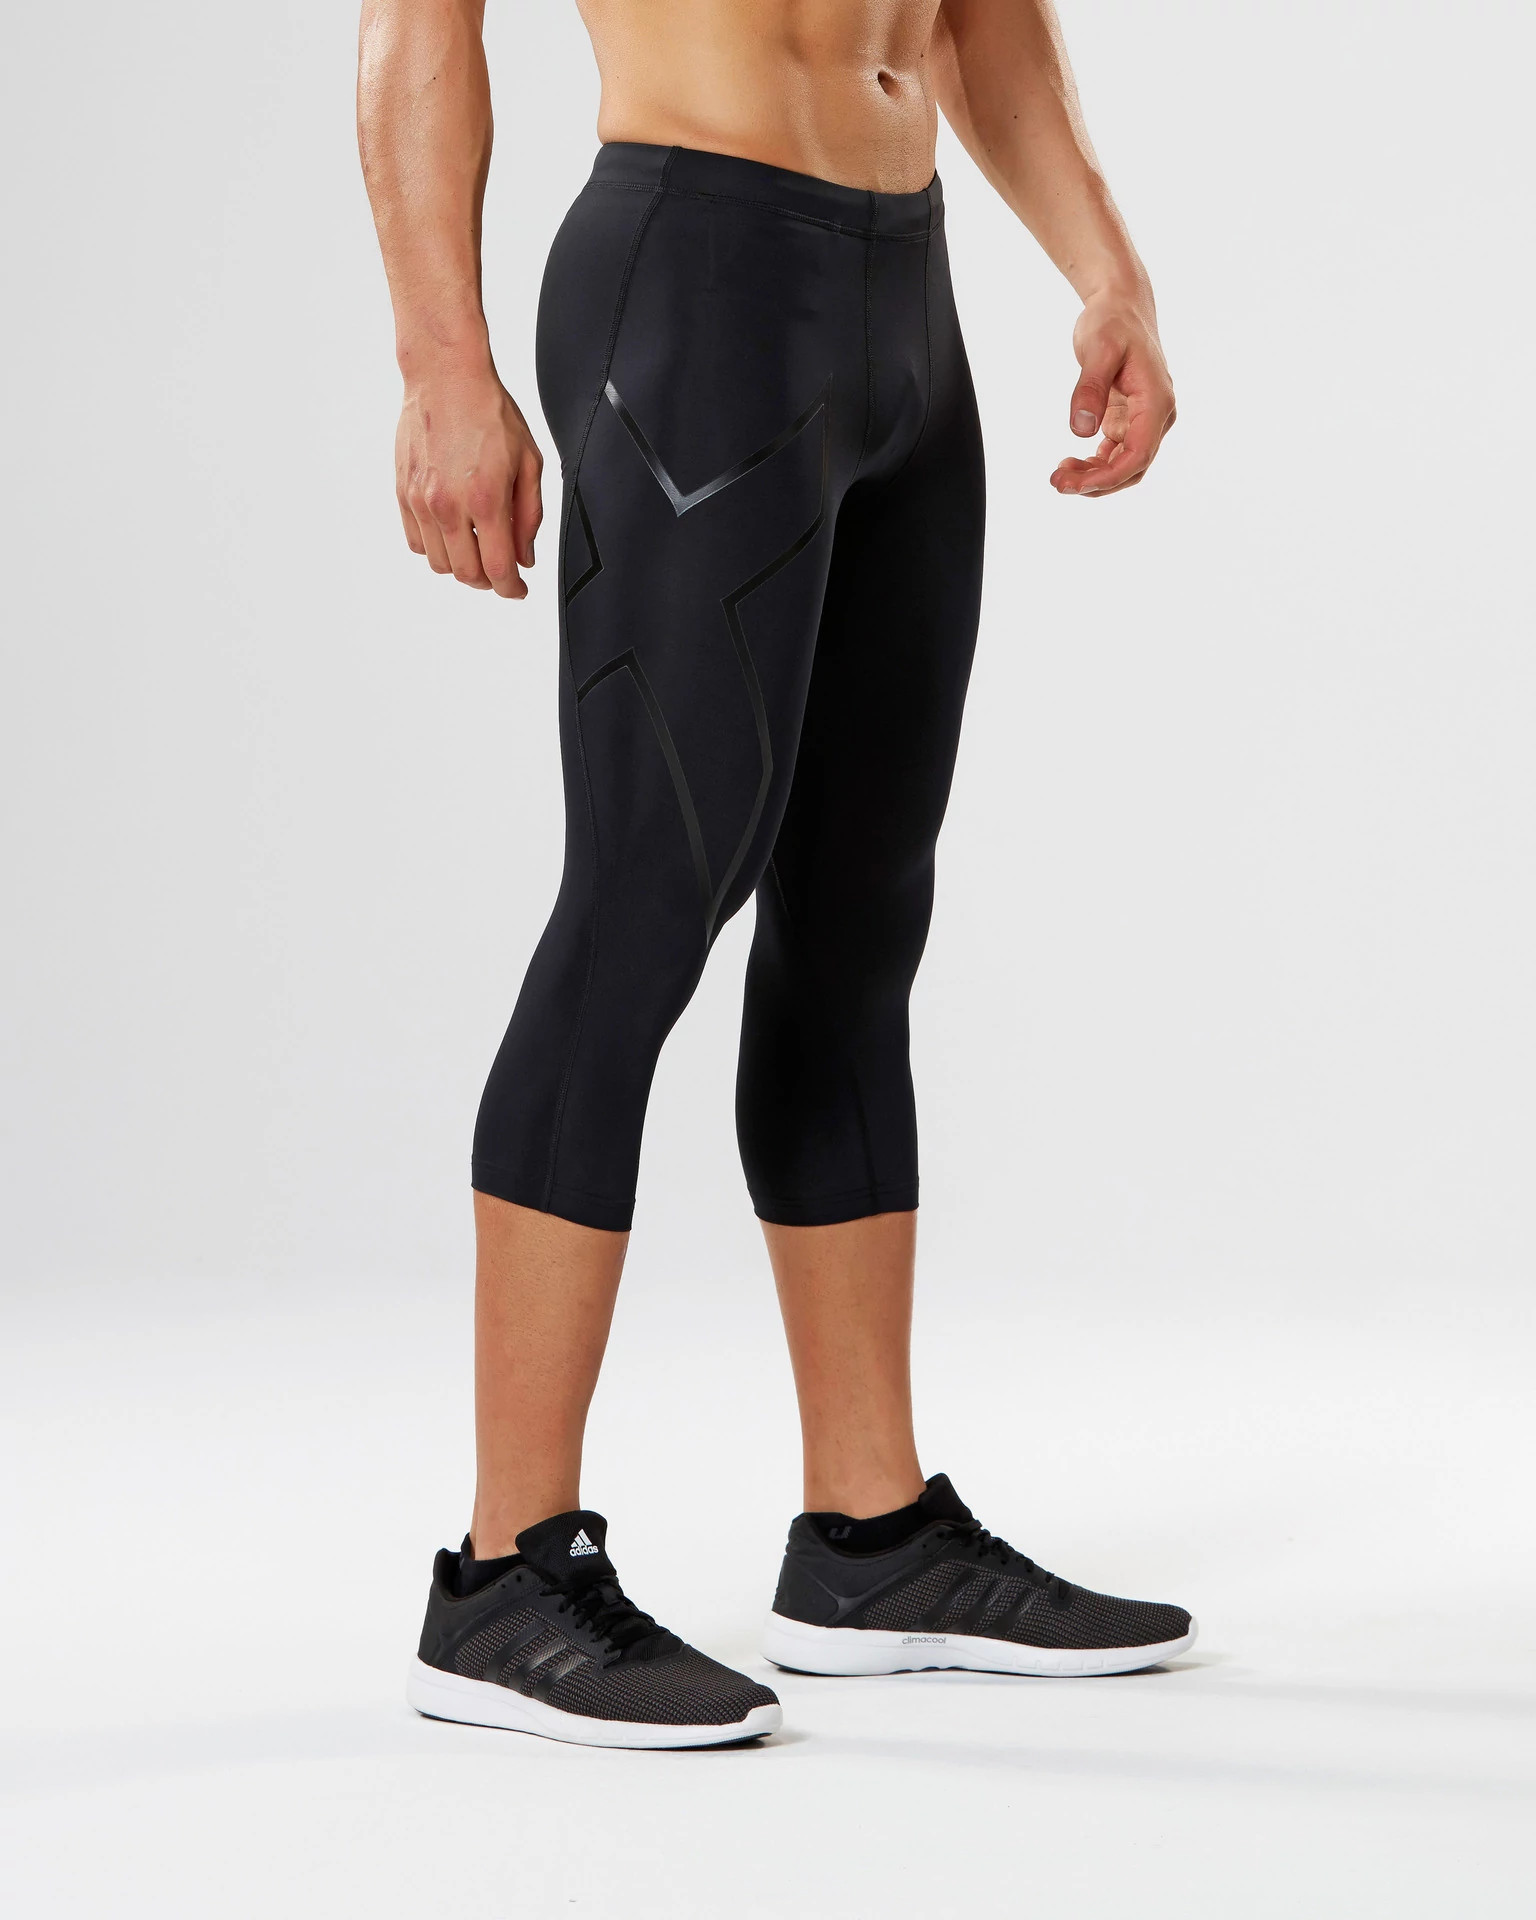 Nike Men's Pro Training 3/4 Compression Tights (Carbon Heather)